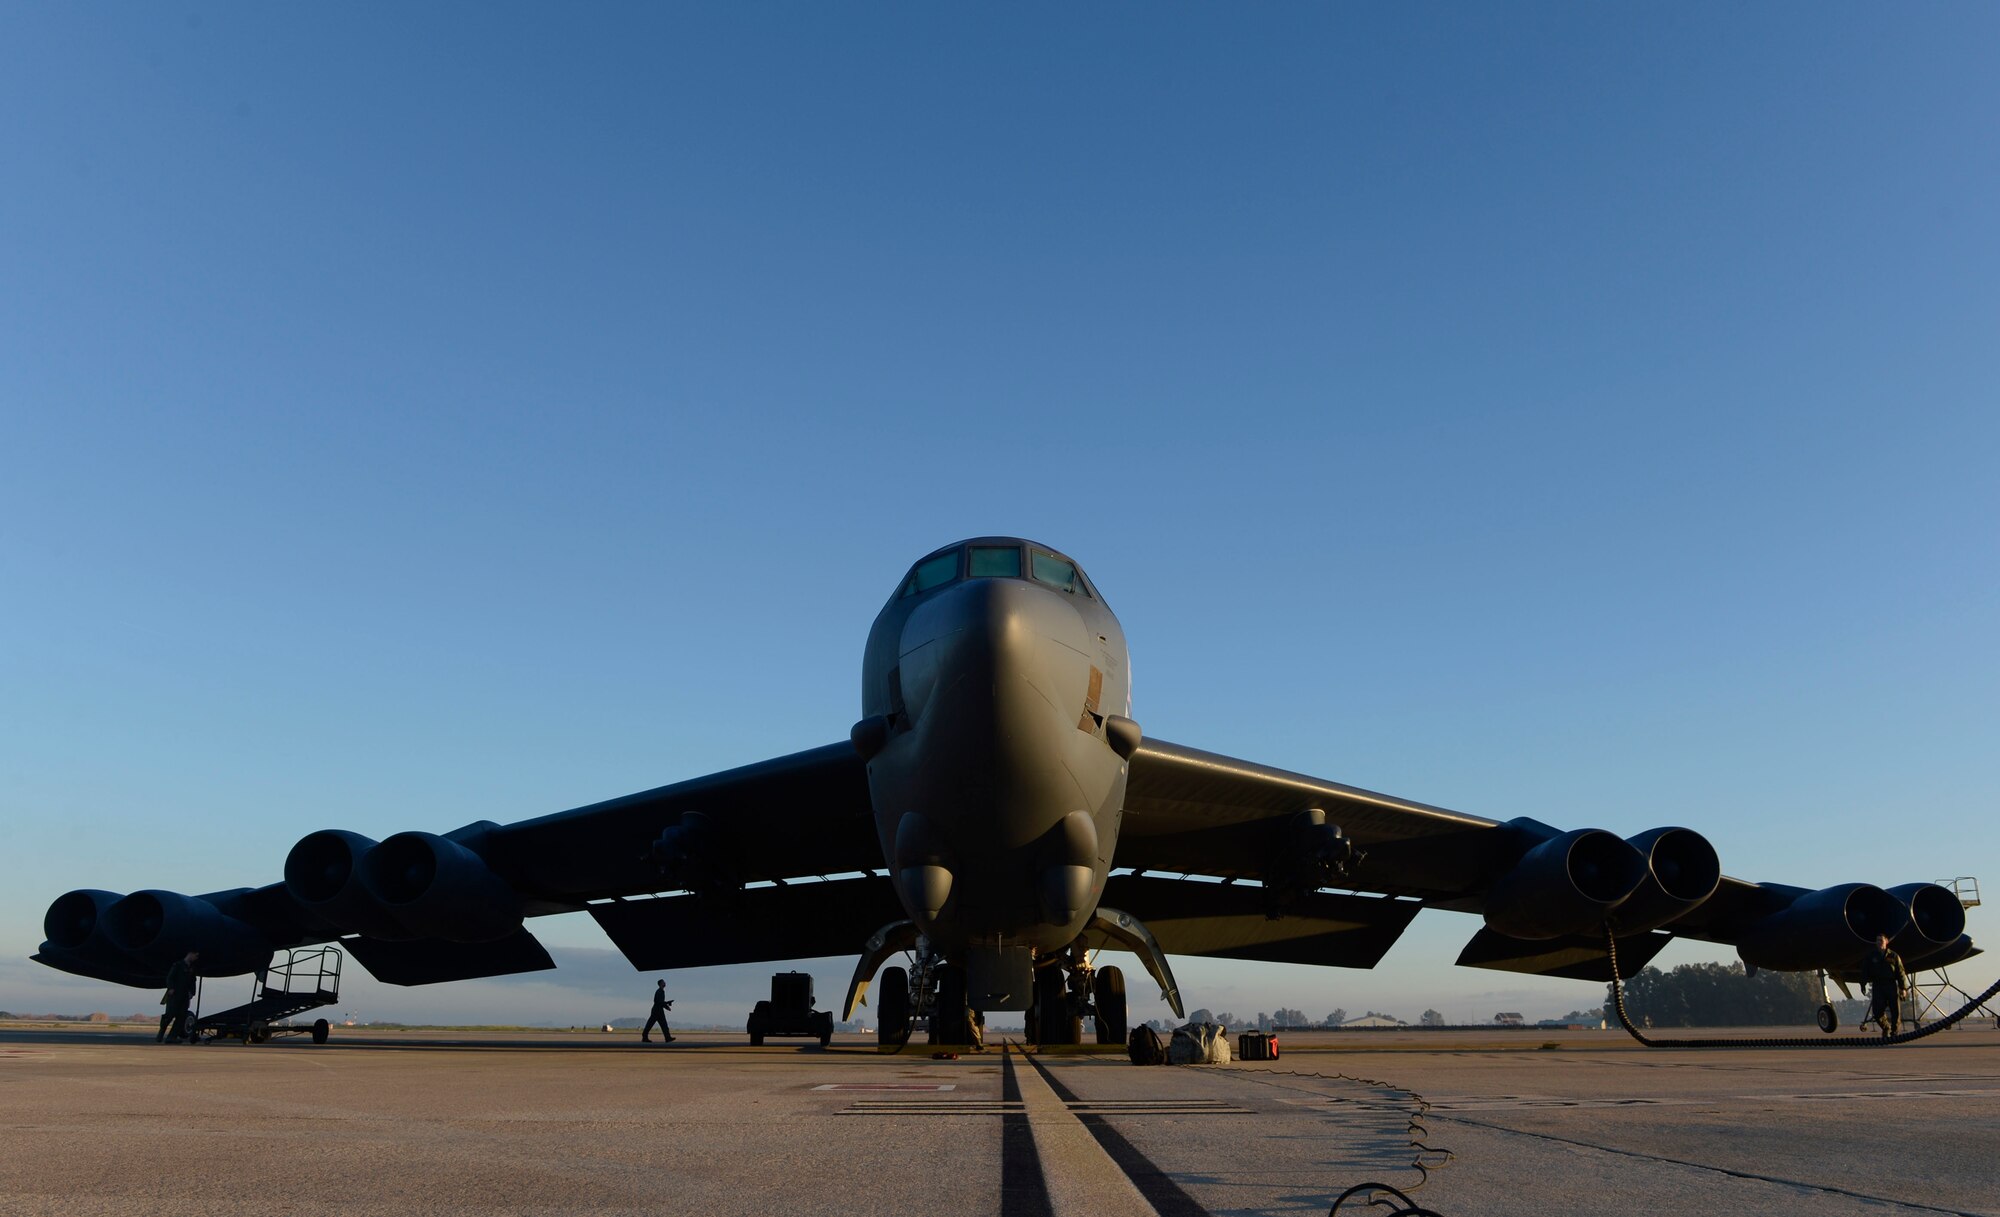 A B-52 Stratofortress sits on the flightline of Morón Air Base, Spain, Jan. 17, 2018. Through U.S. and Spanish cooperation, Morón Air Base has a long history of supporting bomber operations and serving the strategic deterrence requirements of U.S. and NATO allies for decades. (U.S. Air Force photo by Senior Airman Natalie Plas)